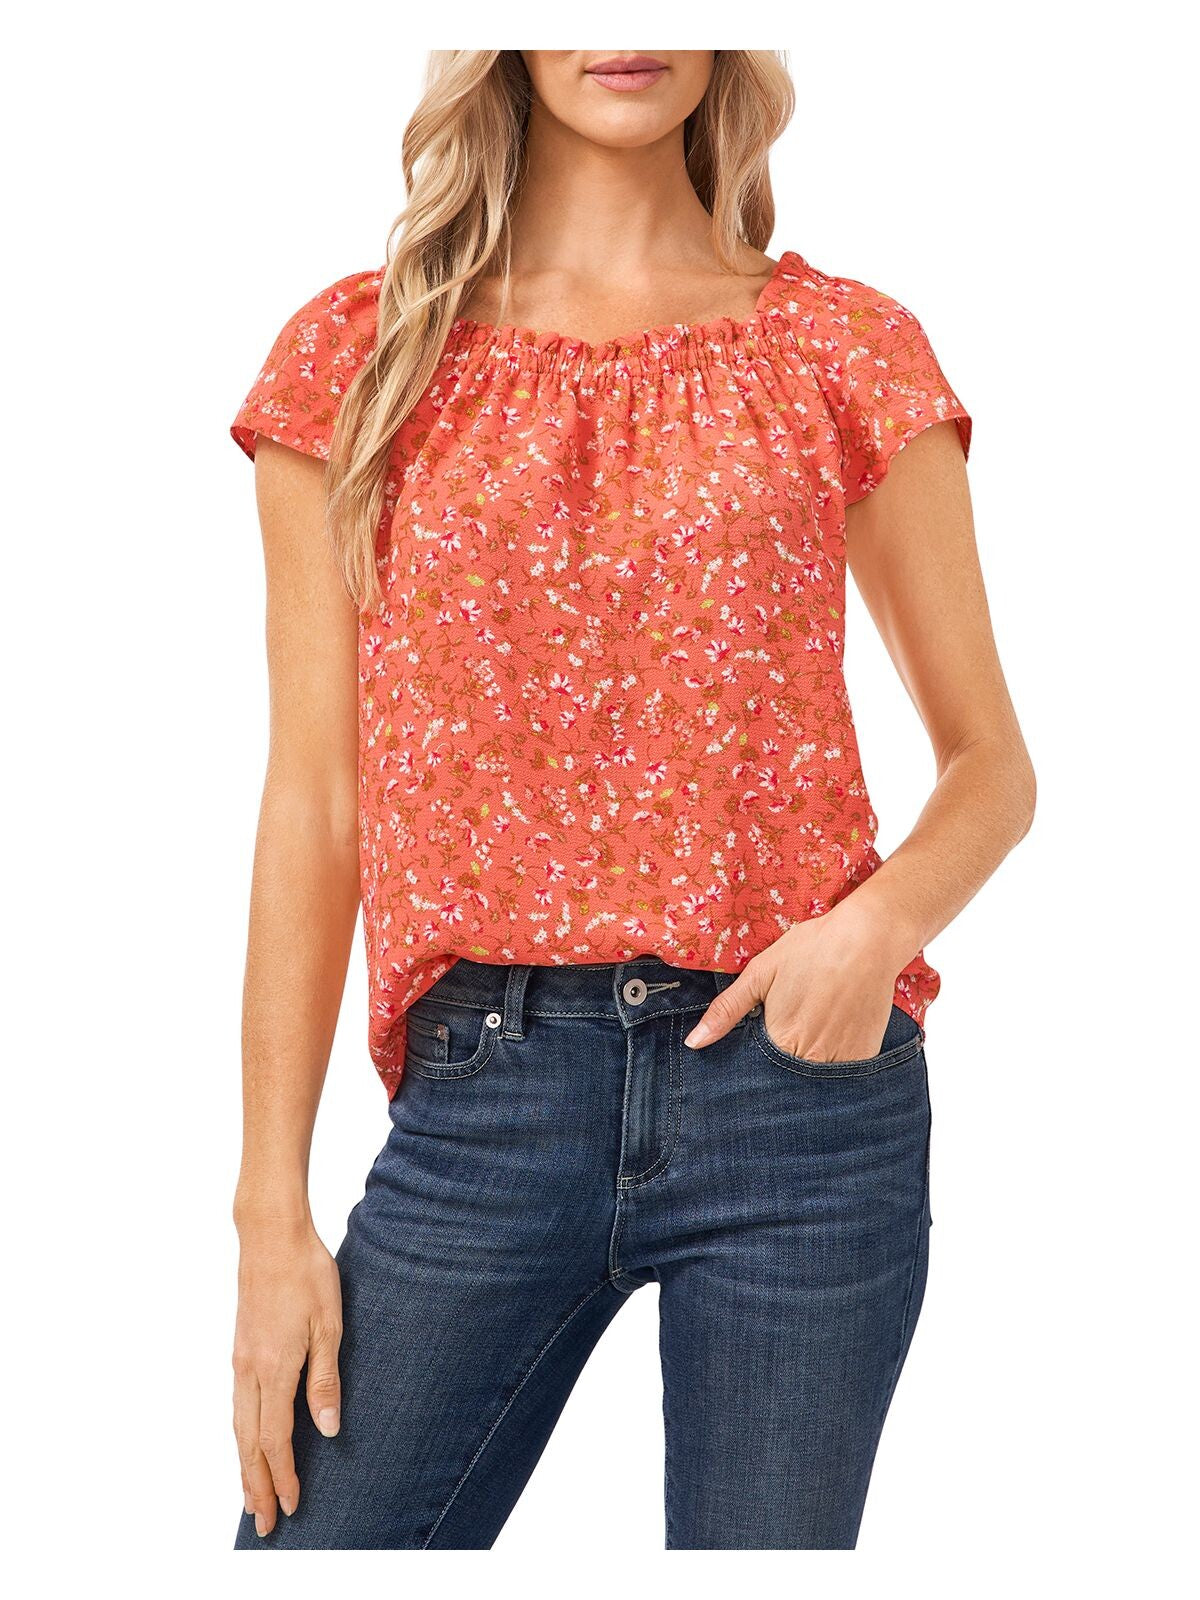 CECE Womens Coral Stretch Ruffled Convertible Floral Short Sleeve Off Shoulder Blouse XS